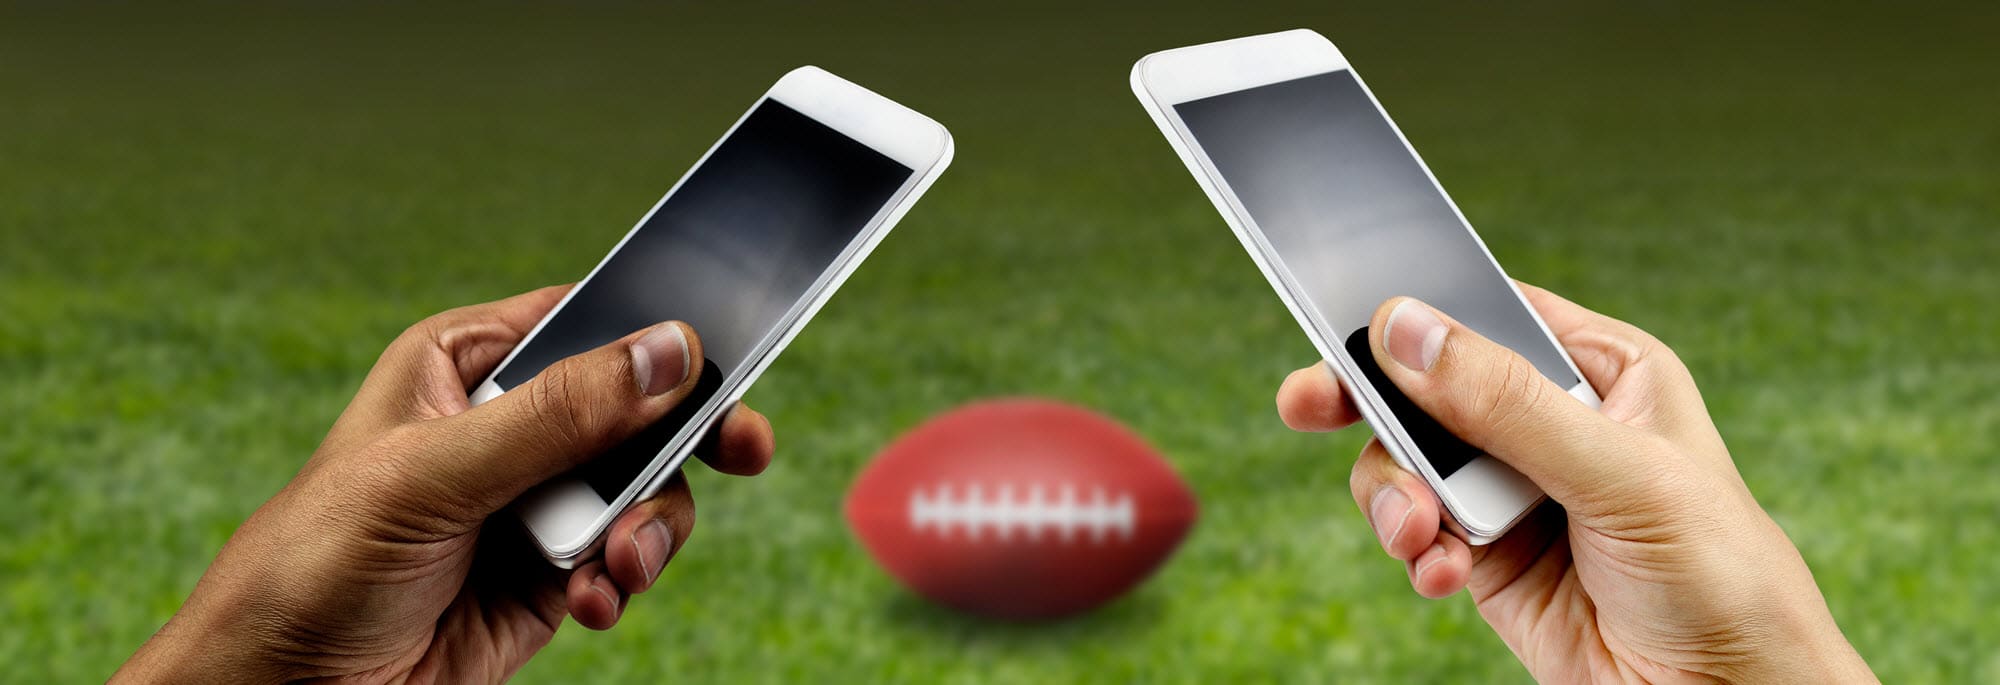 Cell Phone Breaks and 20 Minute Meetings: An NFL Coach is Doing it. Should Pharma Sales Trainers follow Suit?